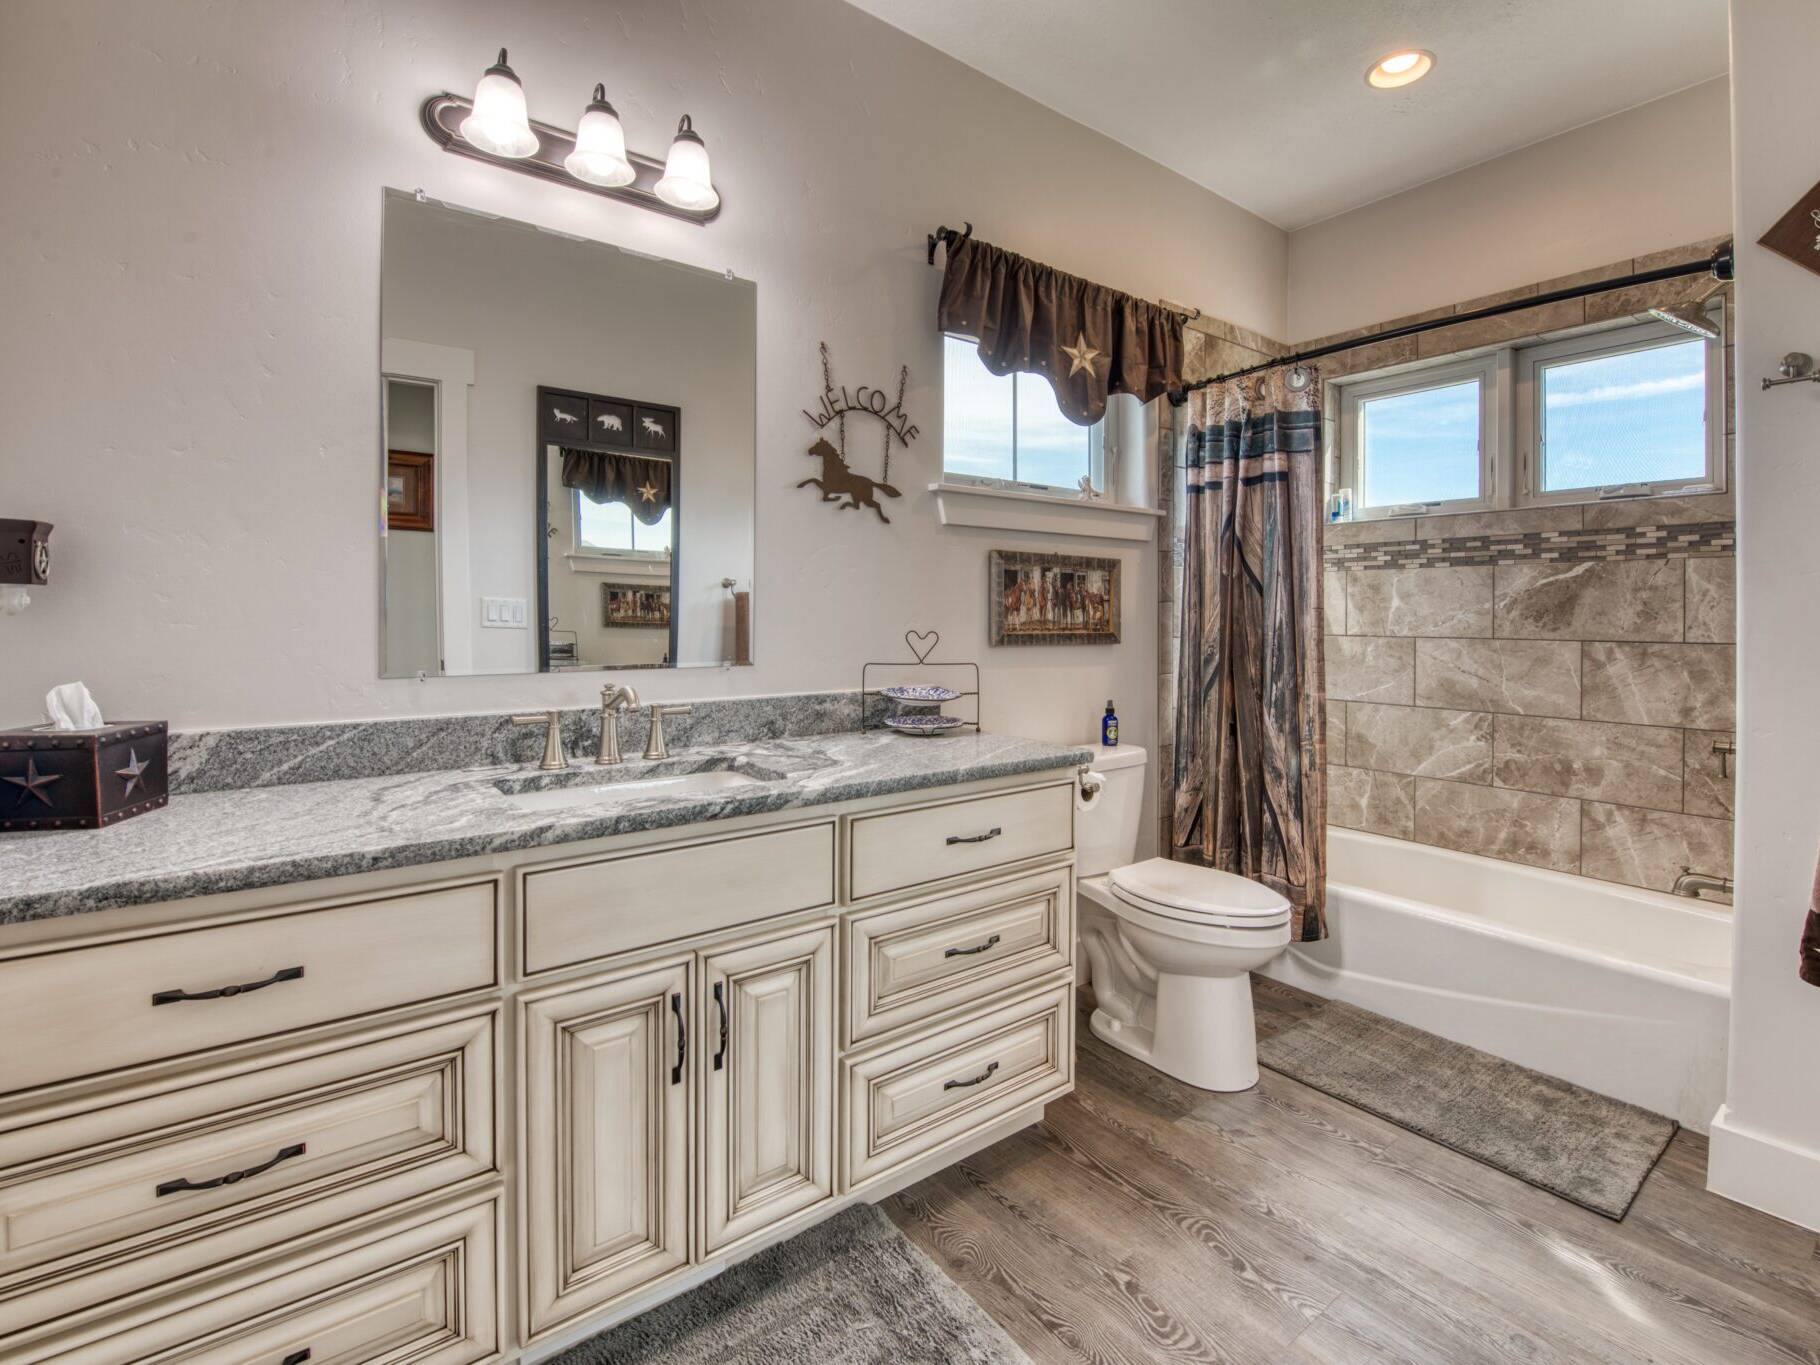 Guest bathroom with LVP flooring, white glazed cabinets, granite countertops, tub/shower with tile surround and windows in a custom home built by Big Sky Builders in Stevensville, MT